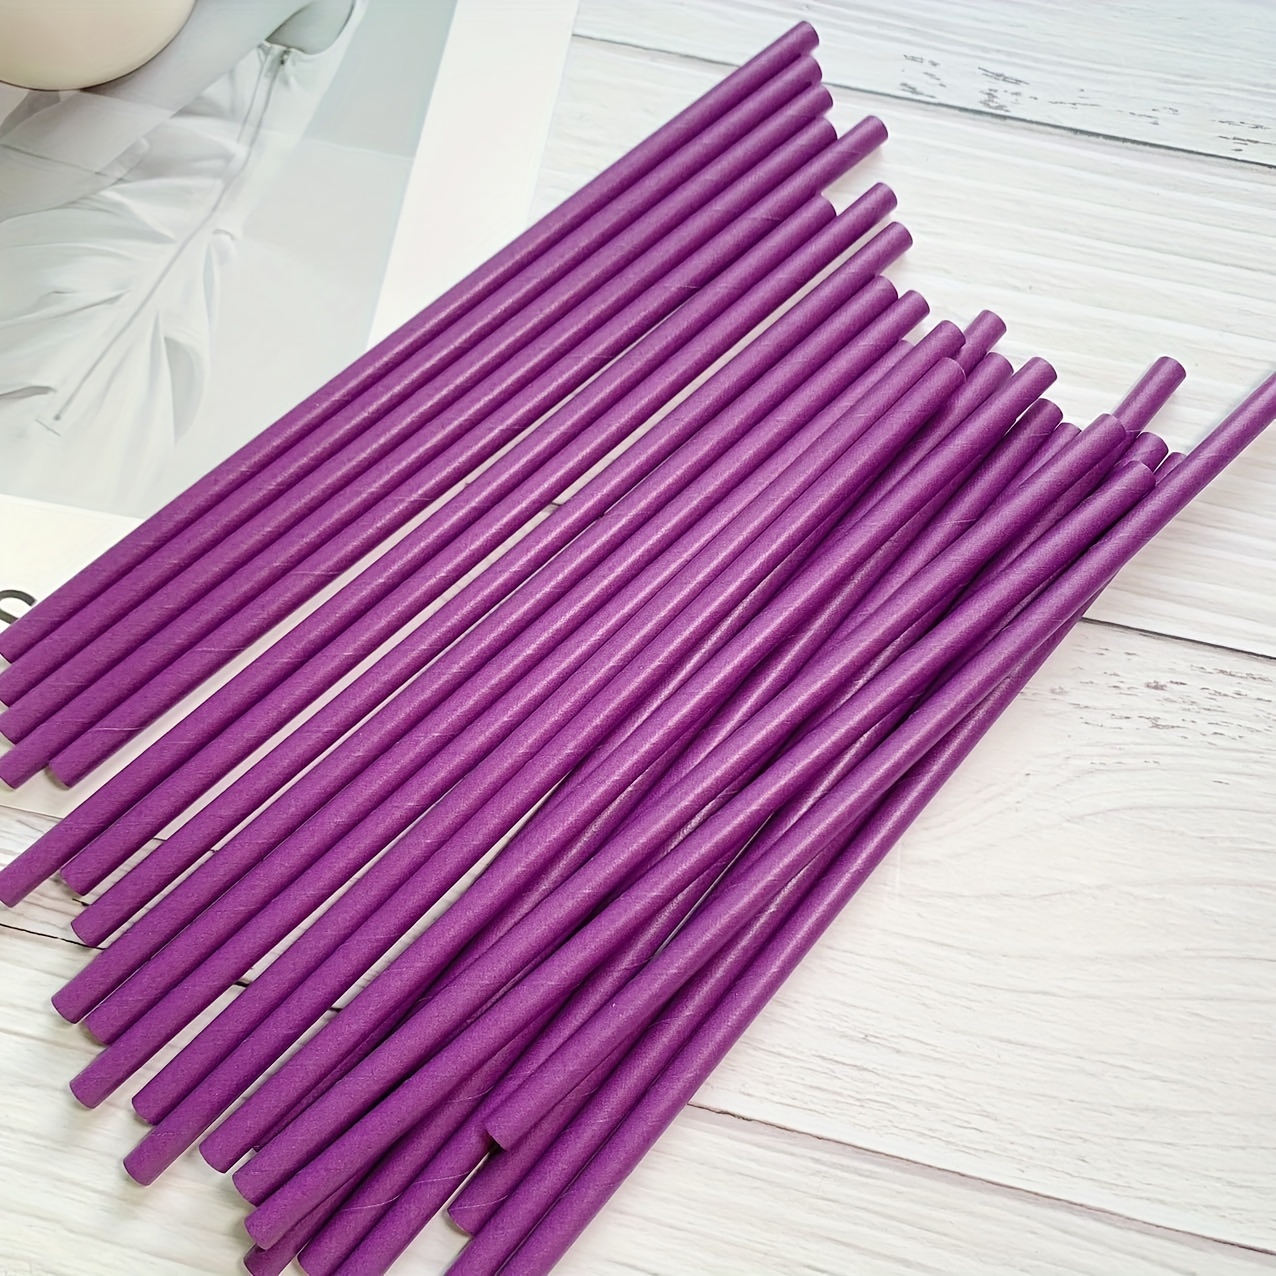 Disposable Colorful Striped Paper Cocktail Sticks for Party on